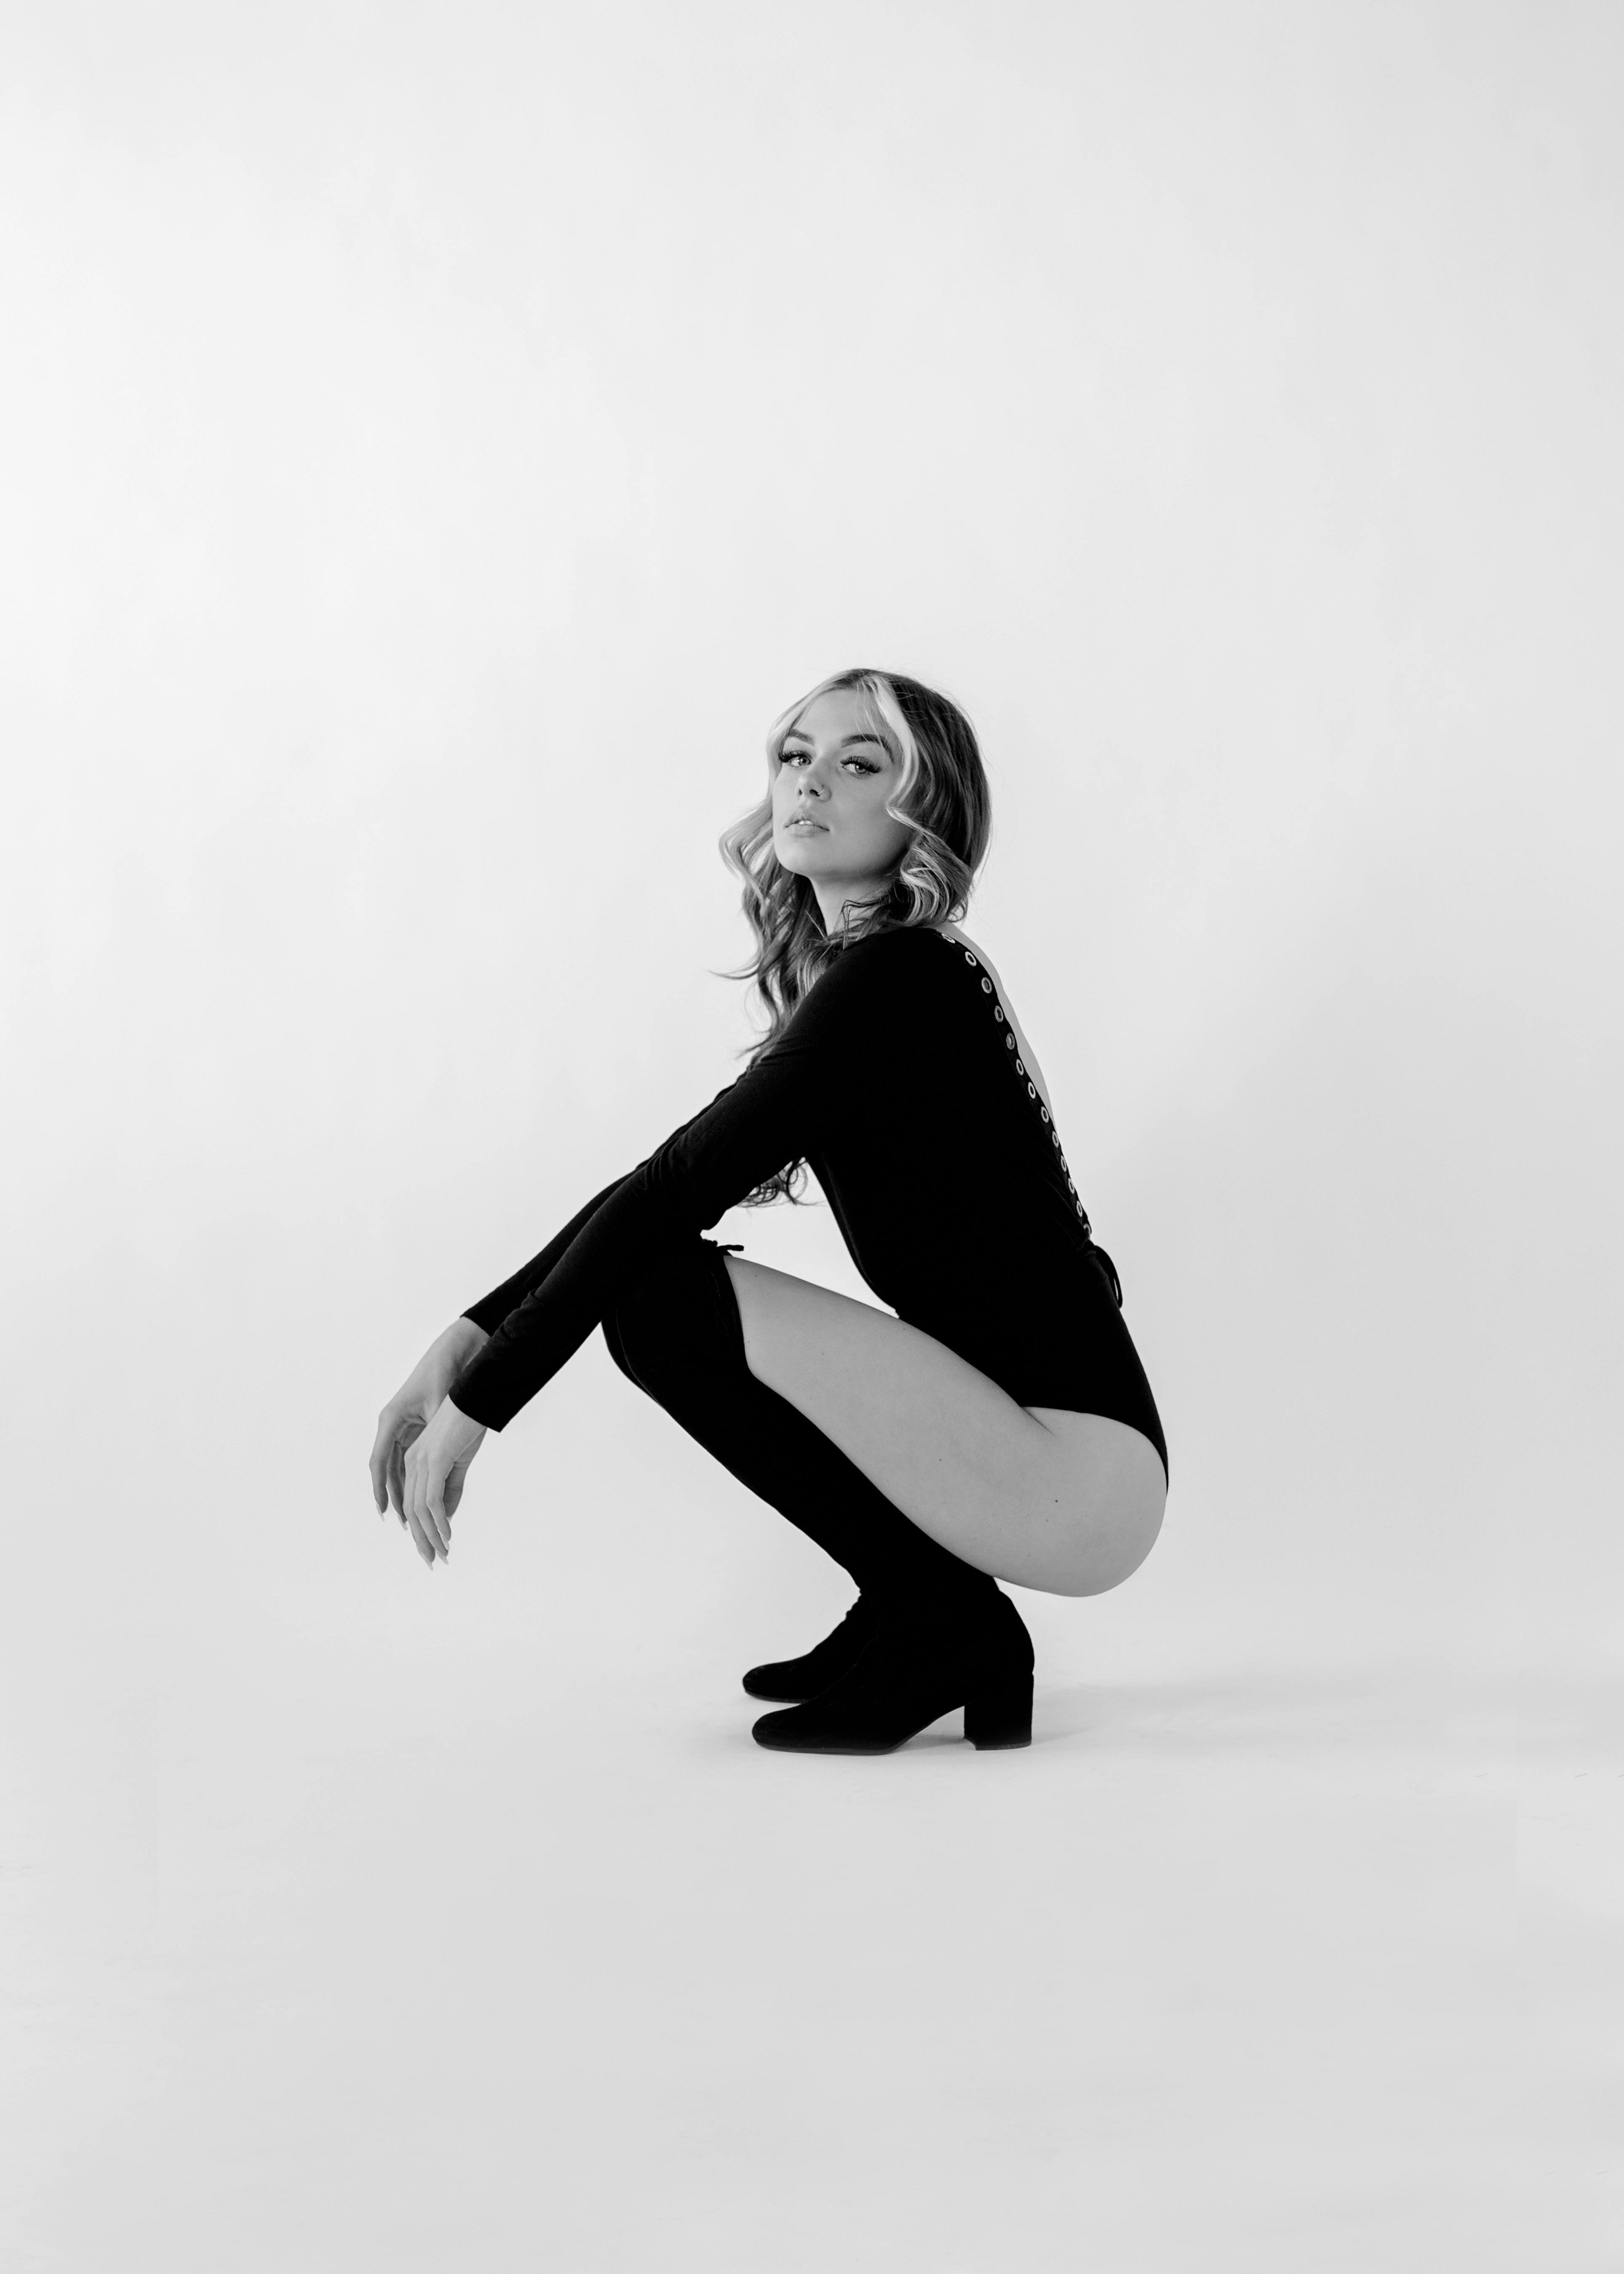 Woman Posing in Black Bodysuit and Ove-the-knee Boots · Free Stock Photo